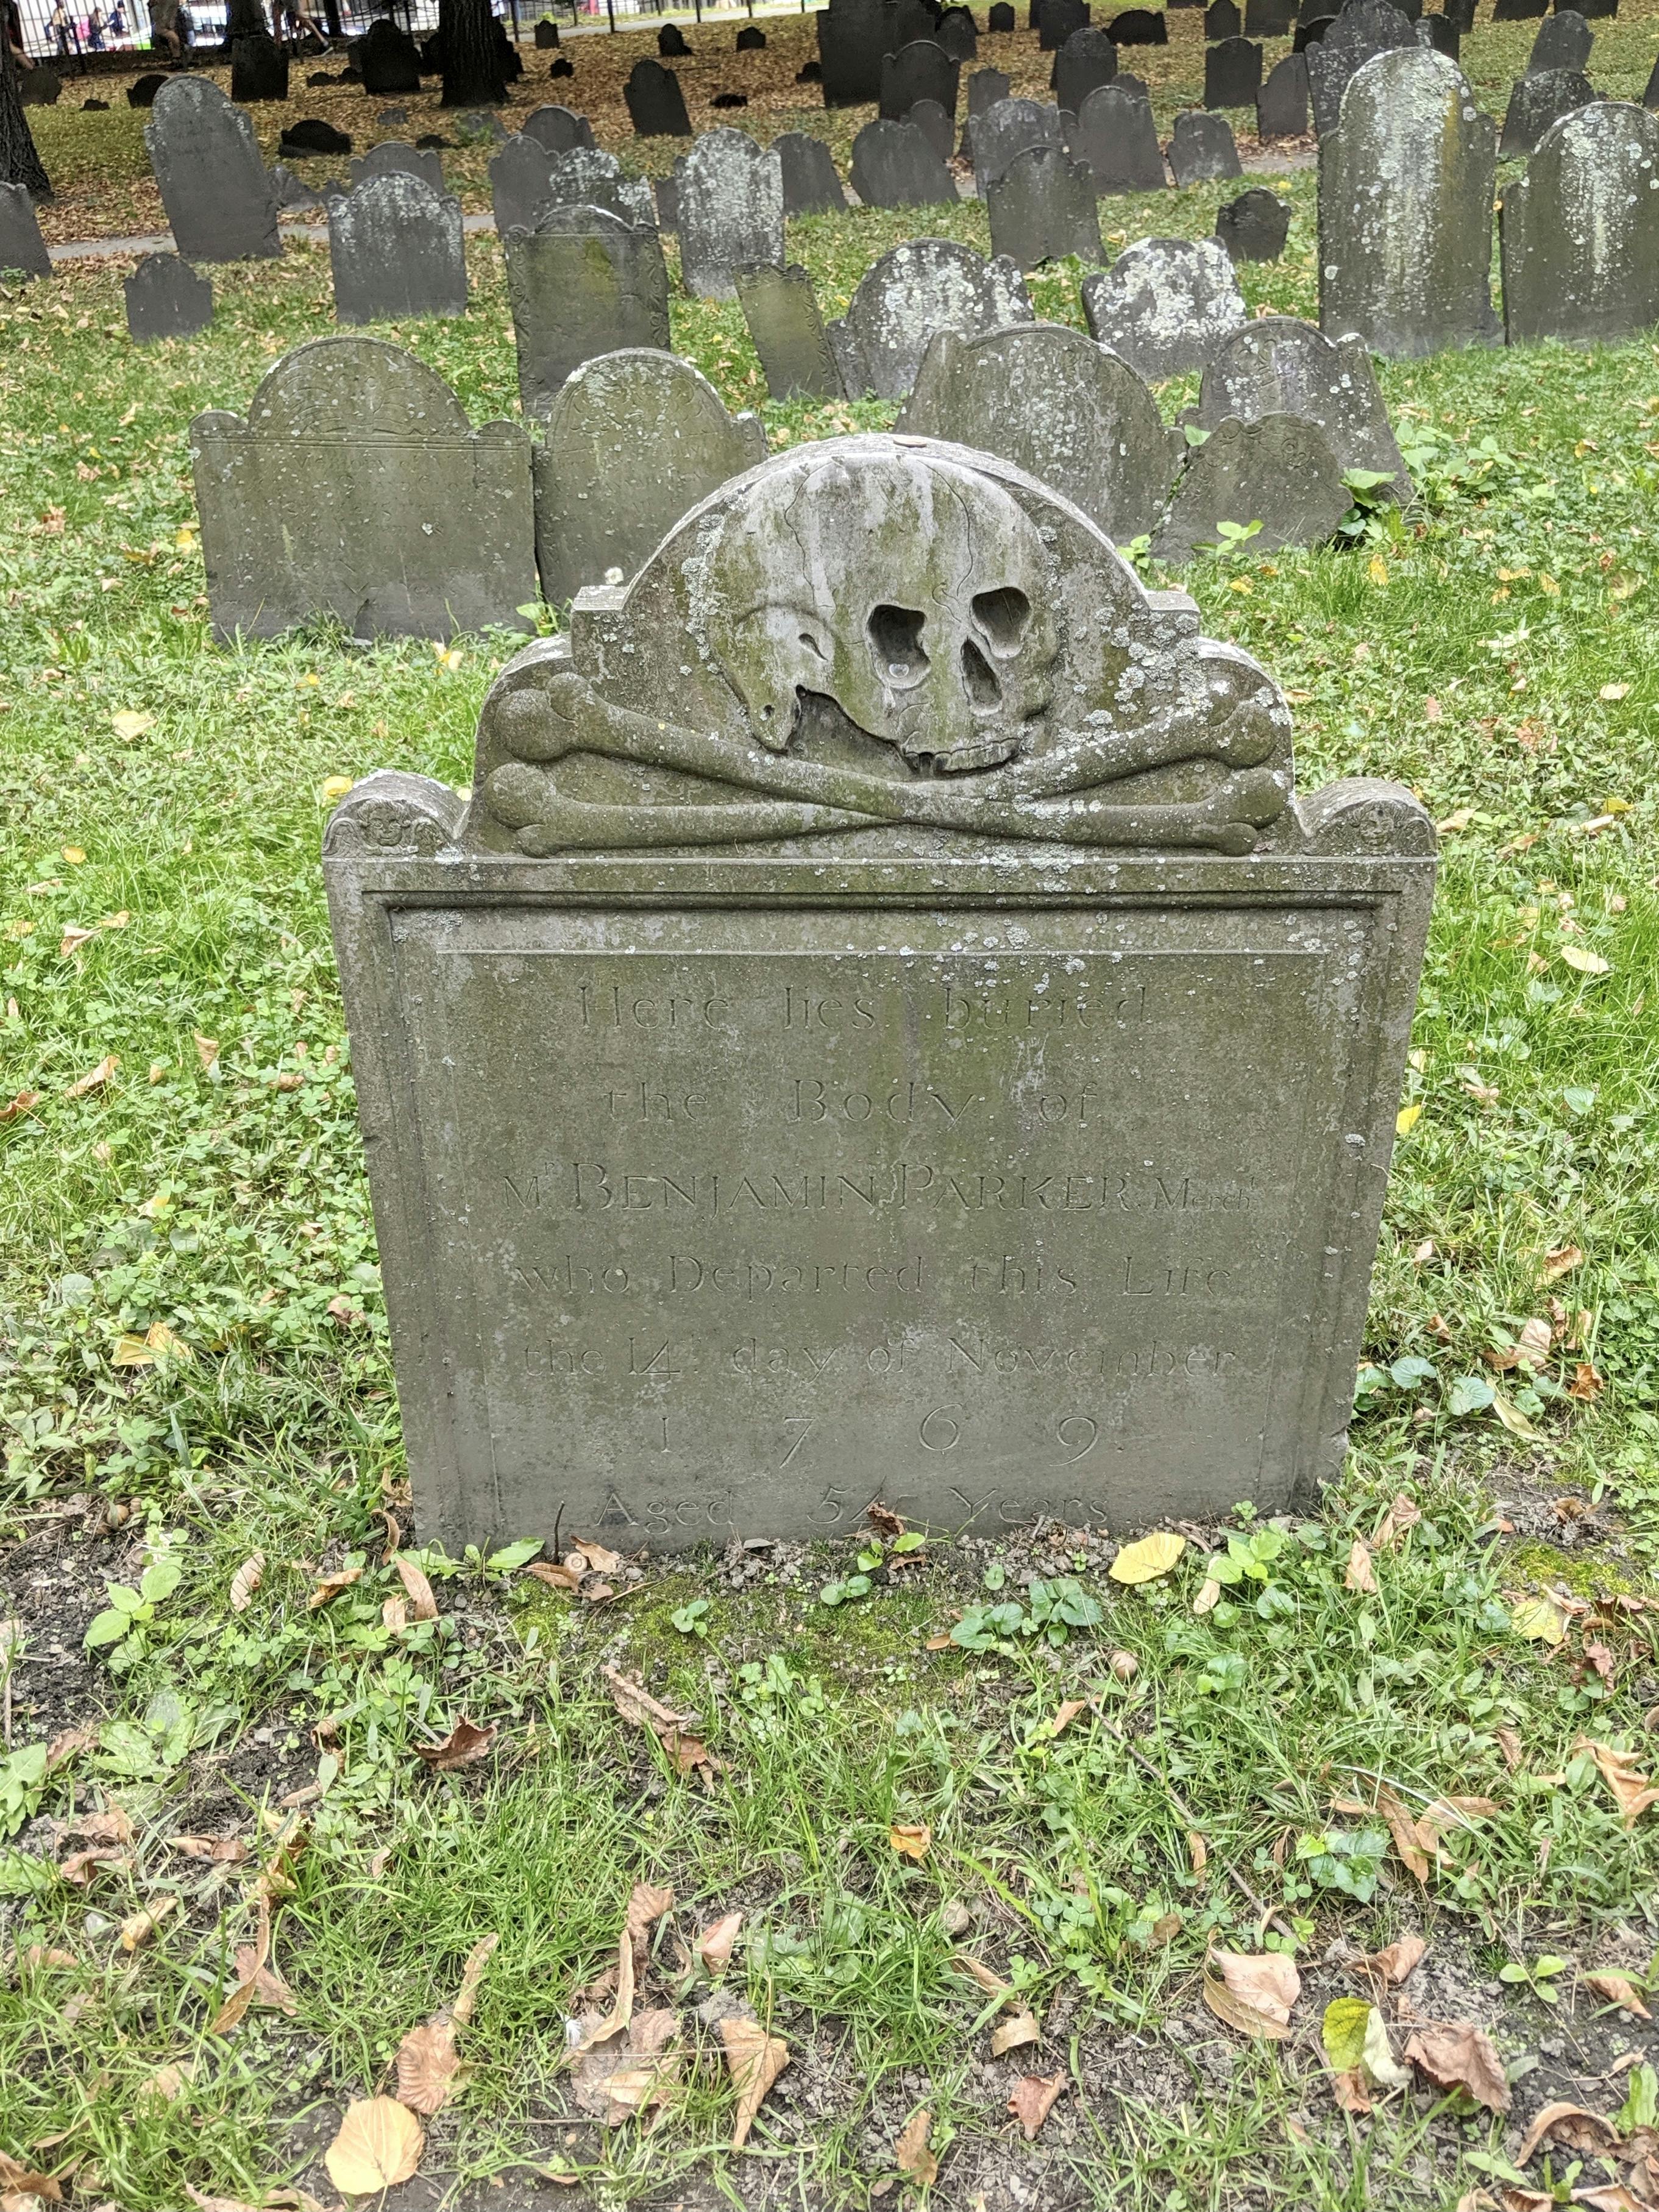 A photo in a graveyard, the stone in the foreground stands upright, at the top is a carved design showing a skull and crossbones. There is an inscription on the stone which is hard to read, but the date 1769 is clear.